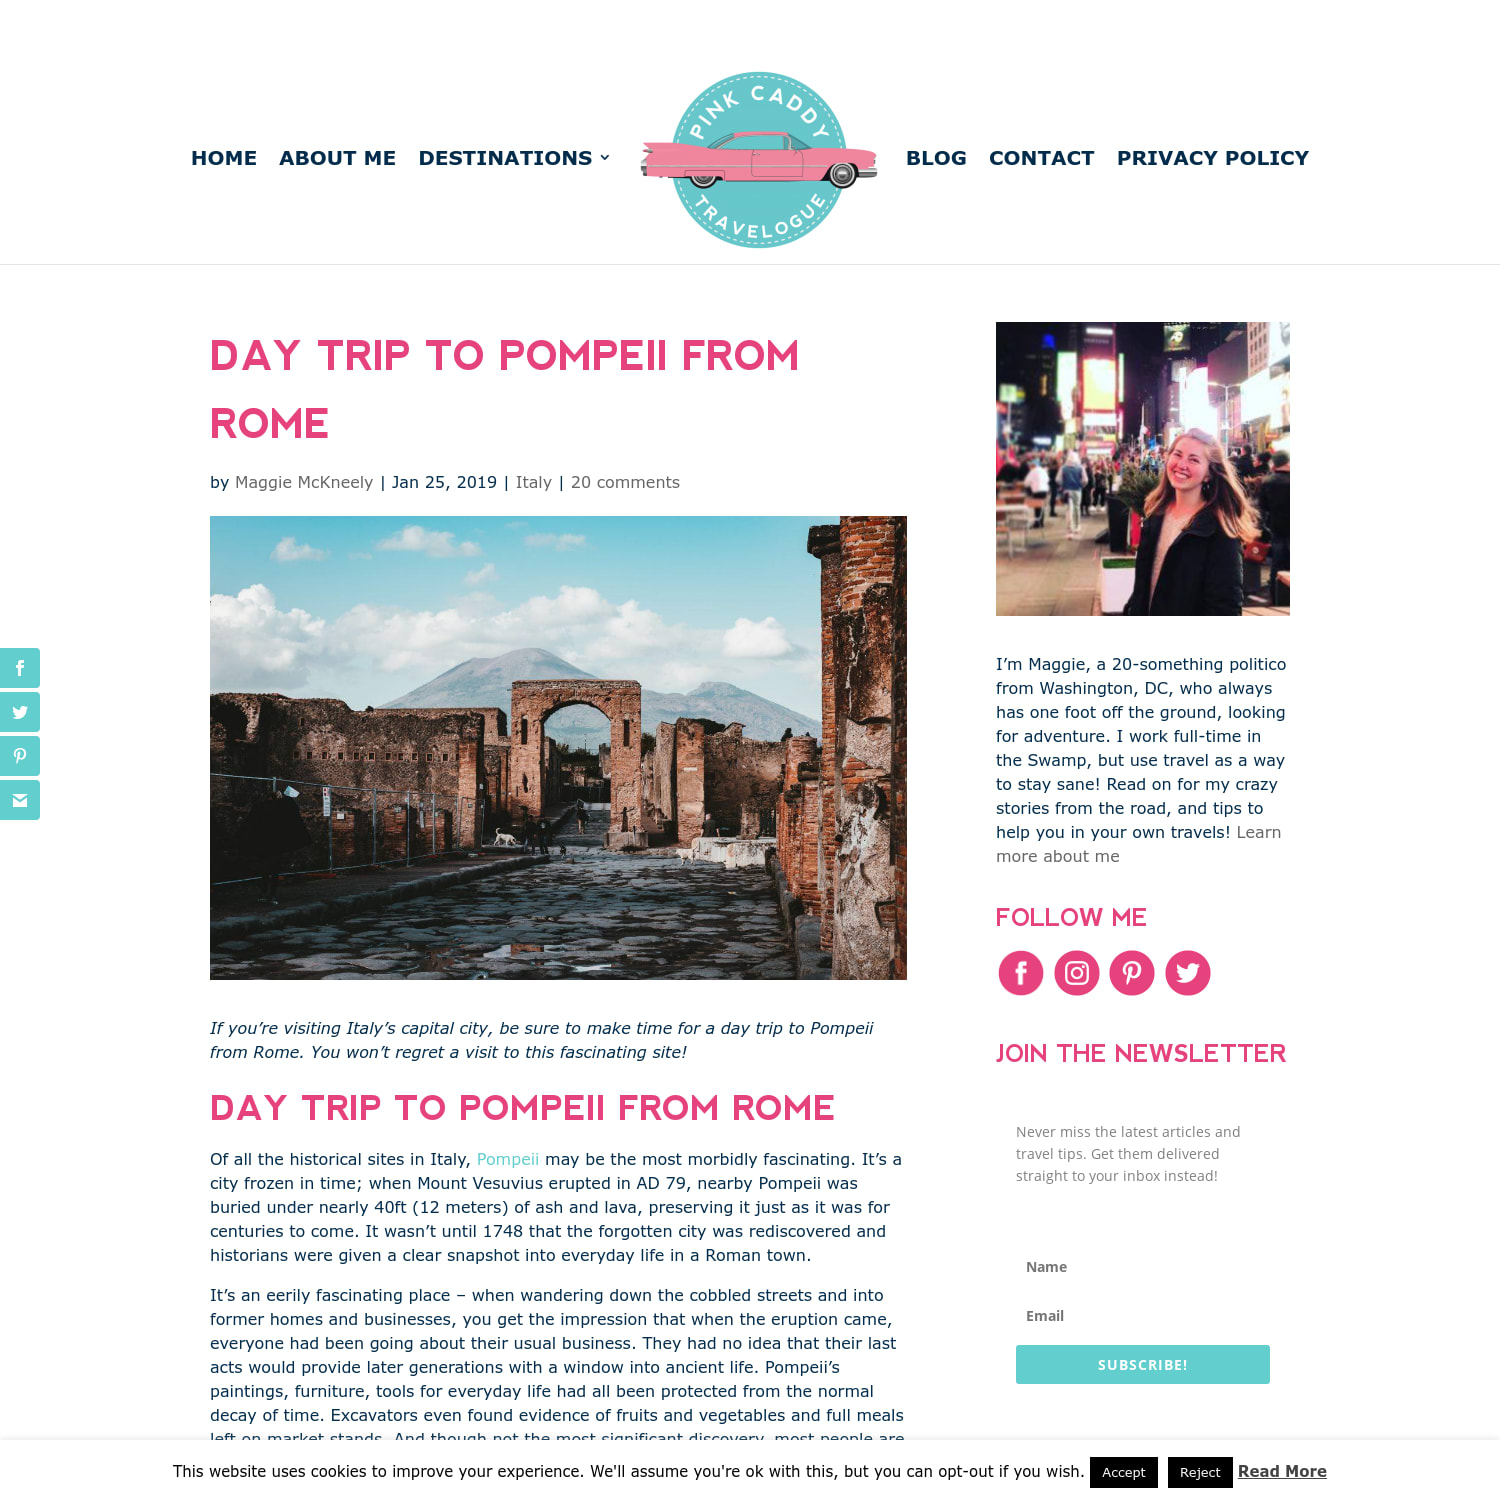 Day Trip to Pompeii from Rome - Pink Caddy Travelogue